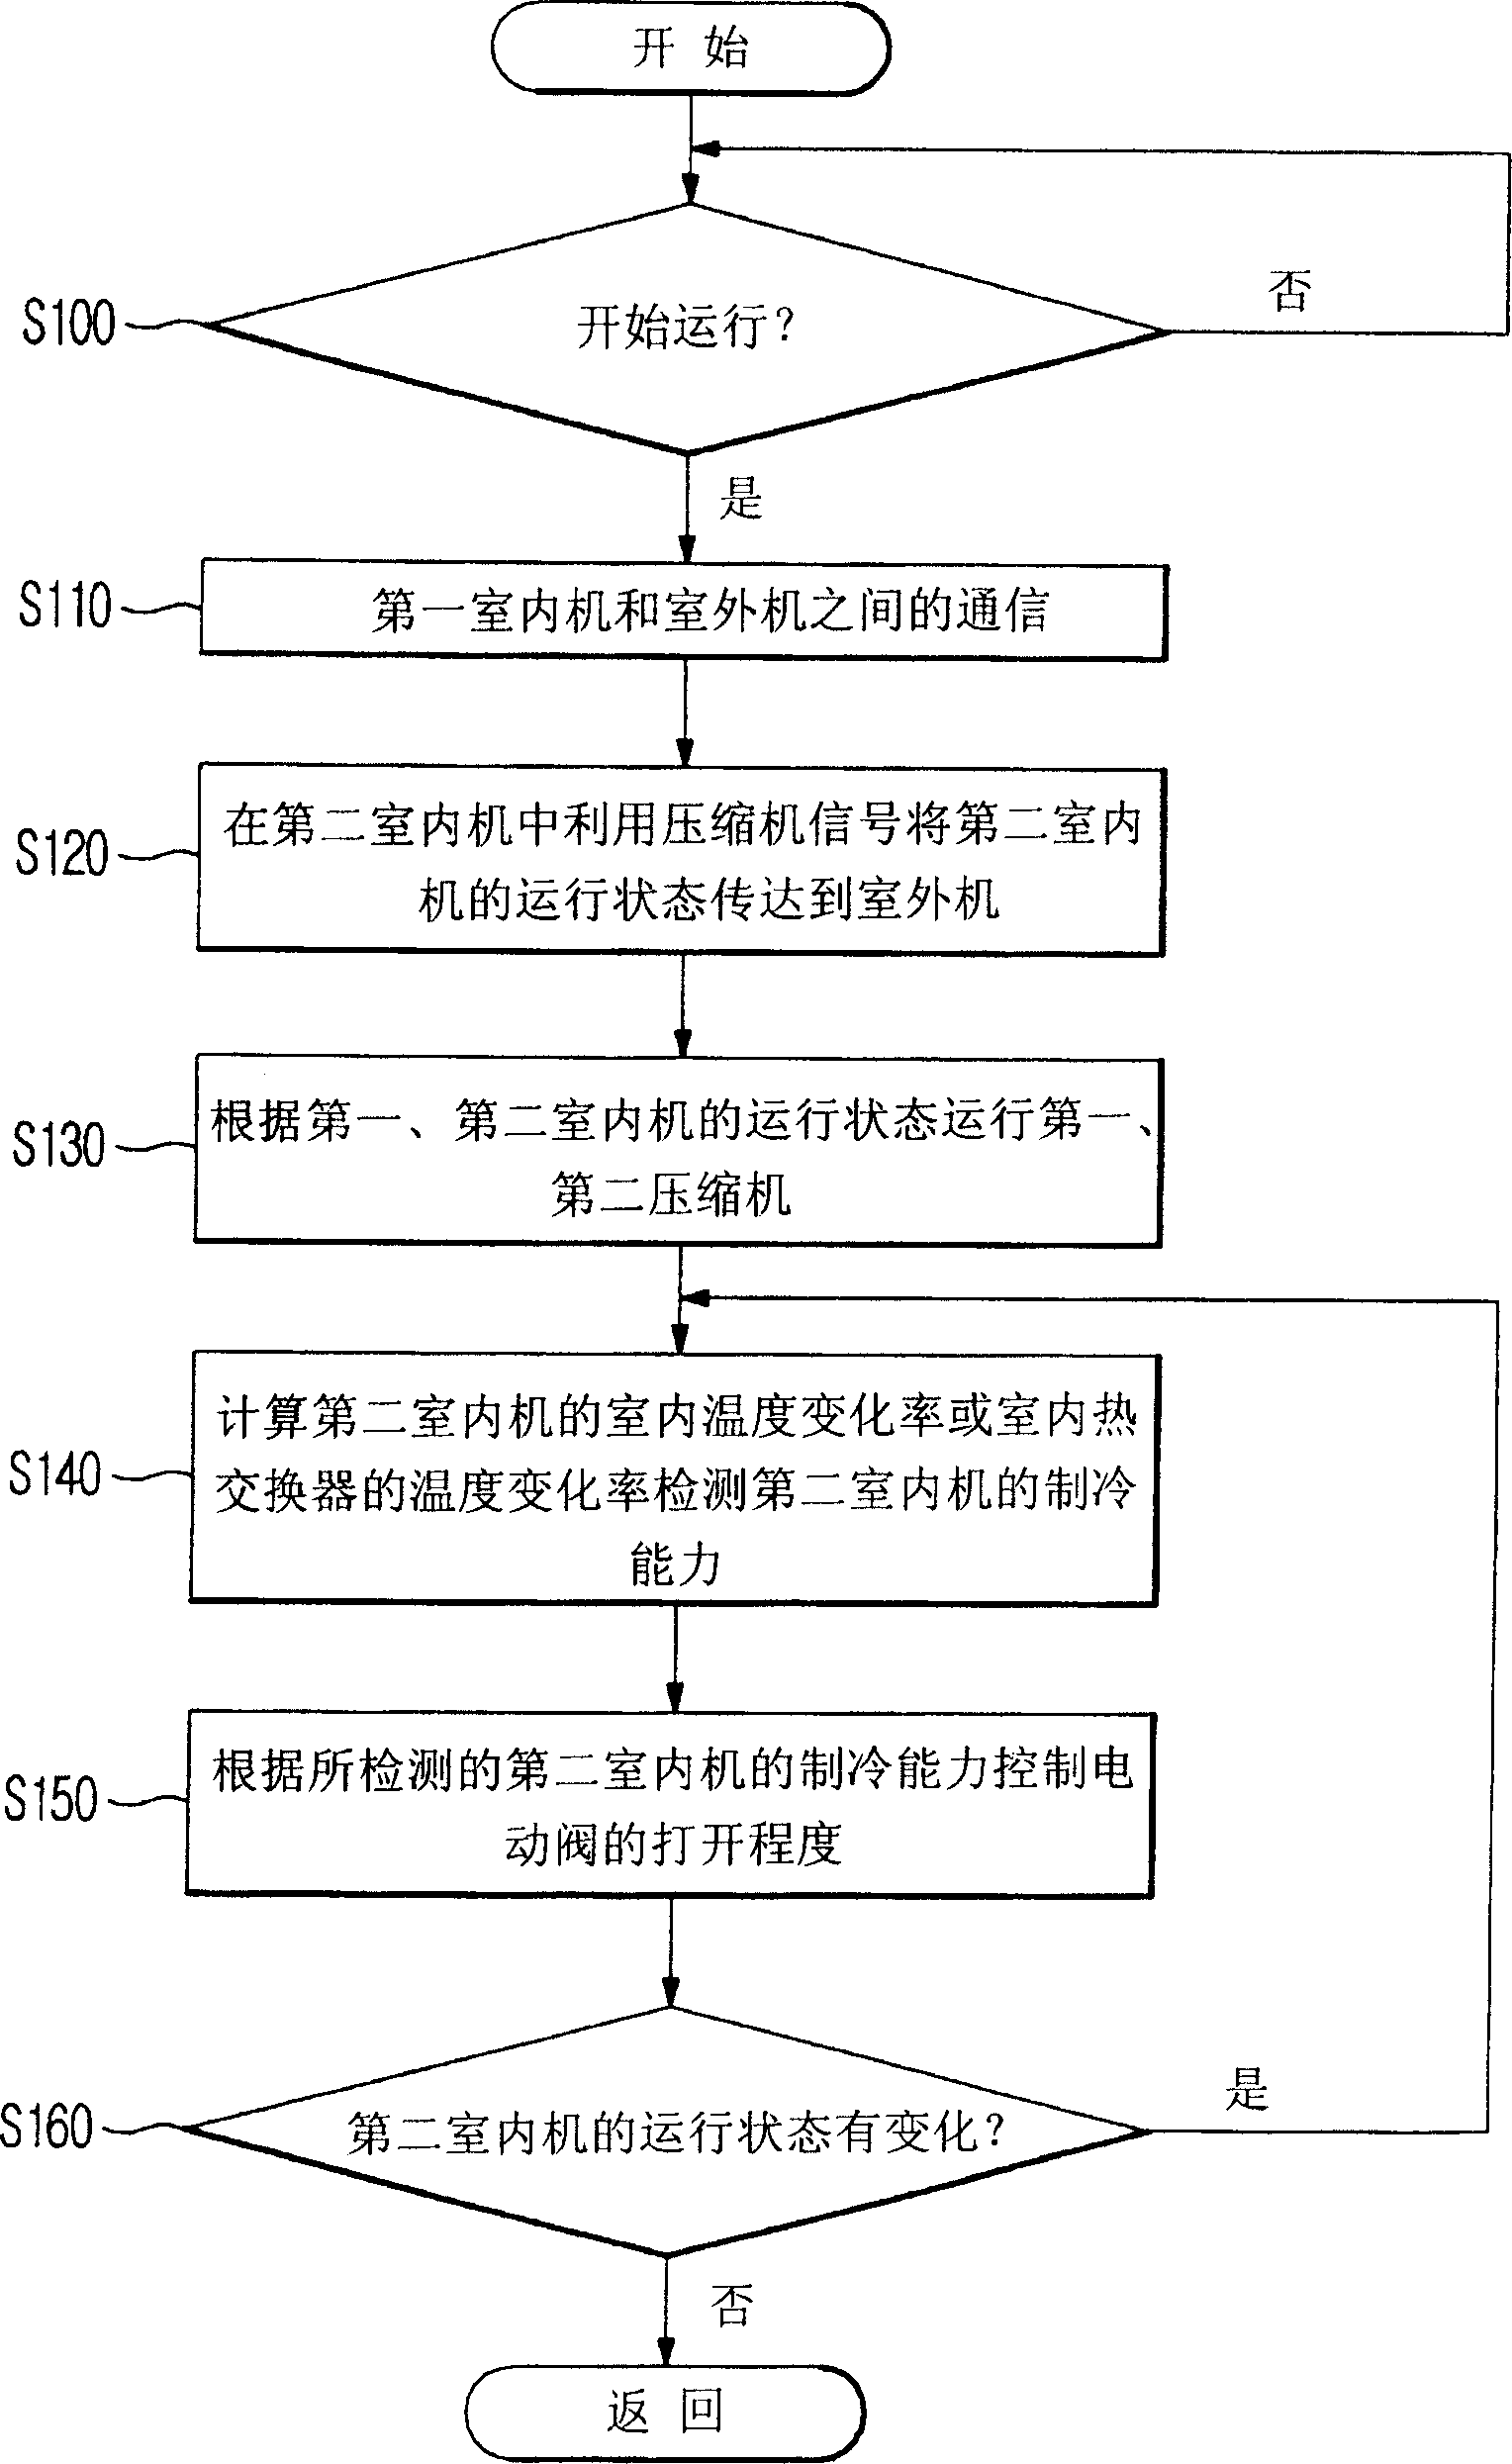 Multiple air conditioner system and its operation and control method